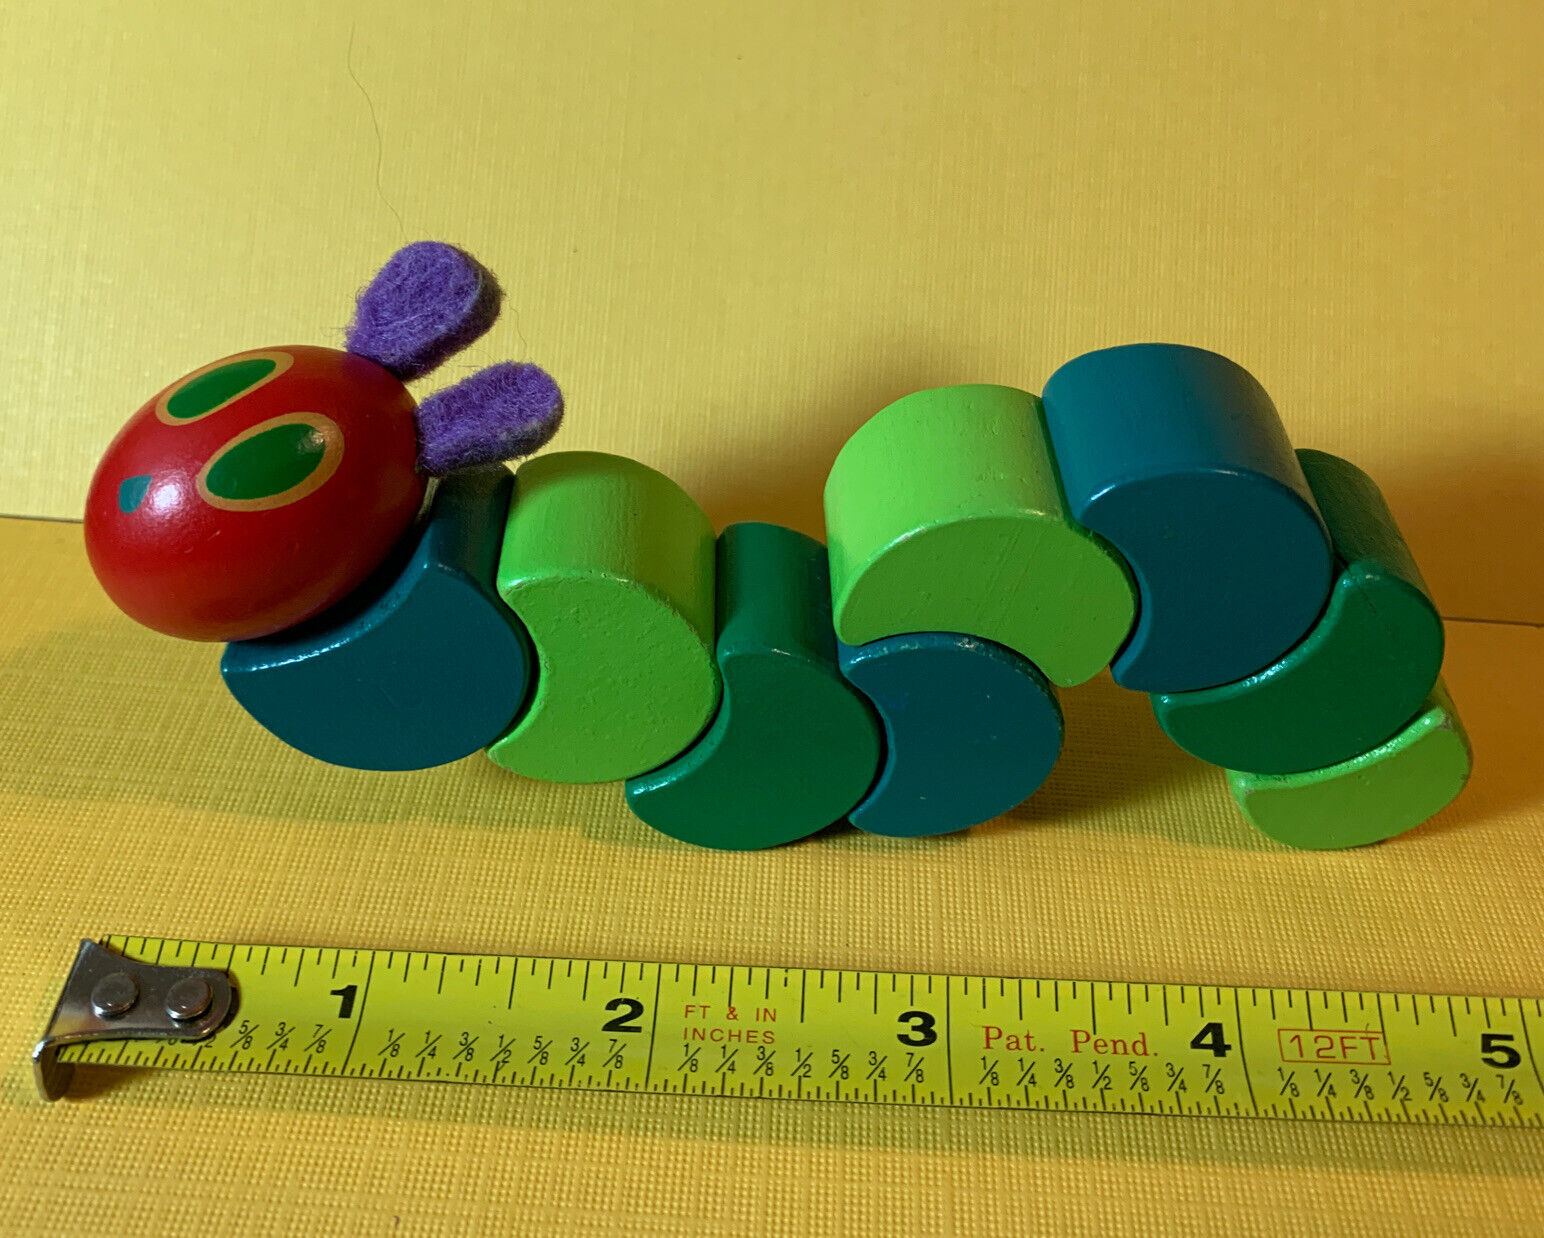 Eric Store Carle Very Hungry Caterpillar 7” Wooden T Twist Play Max 47% OFF Pose